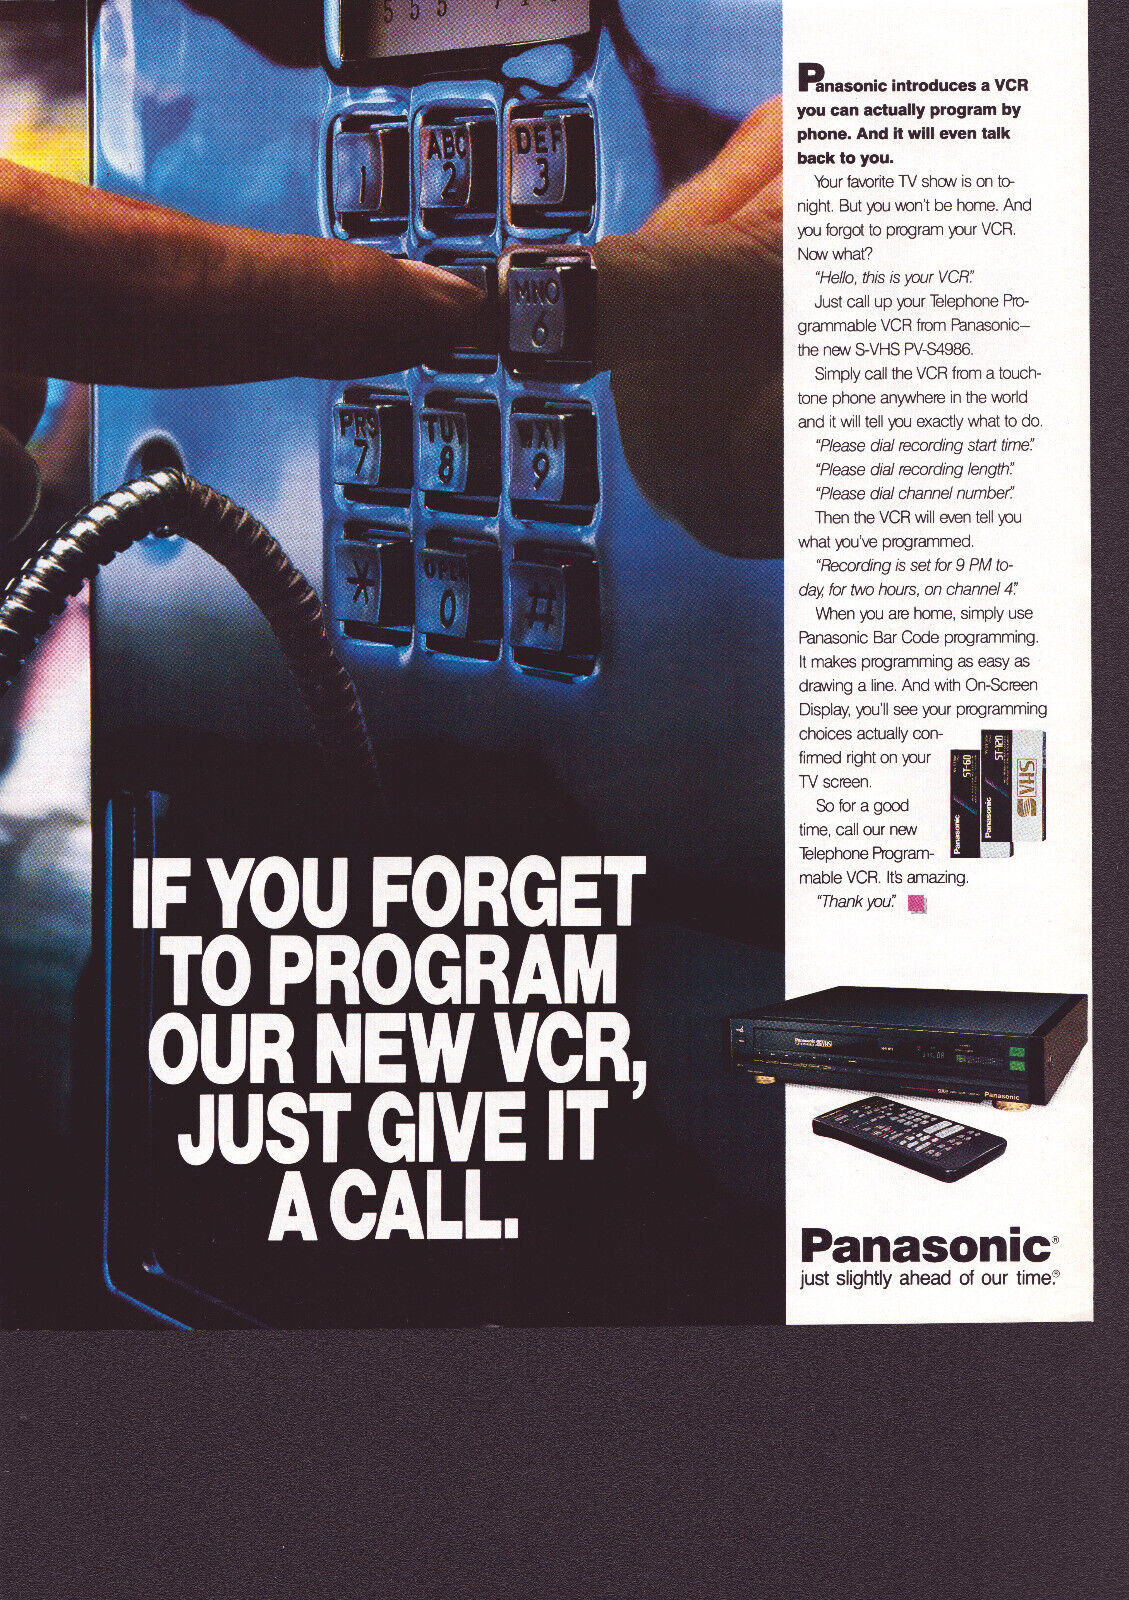 Print Ad 1989 Panasonic VCR Give It a Call Payphone Vintage LIFE Magazine